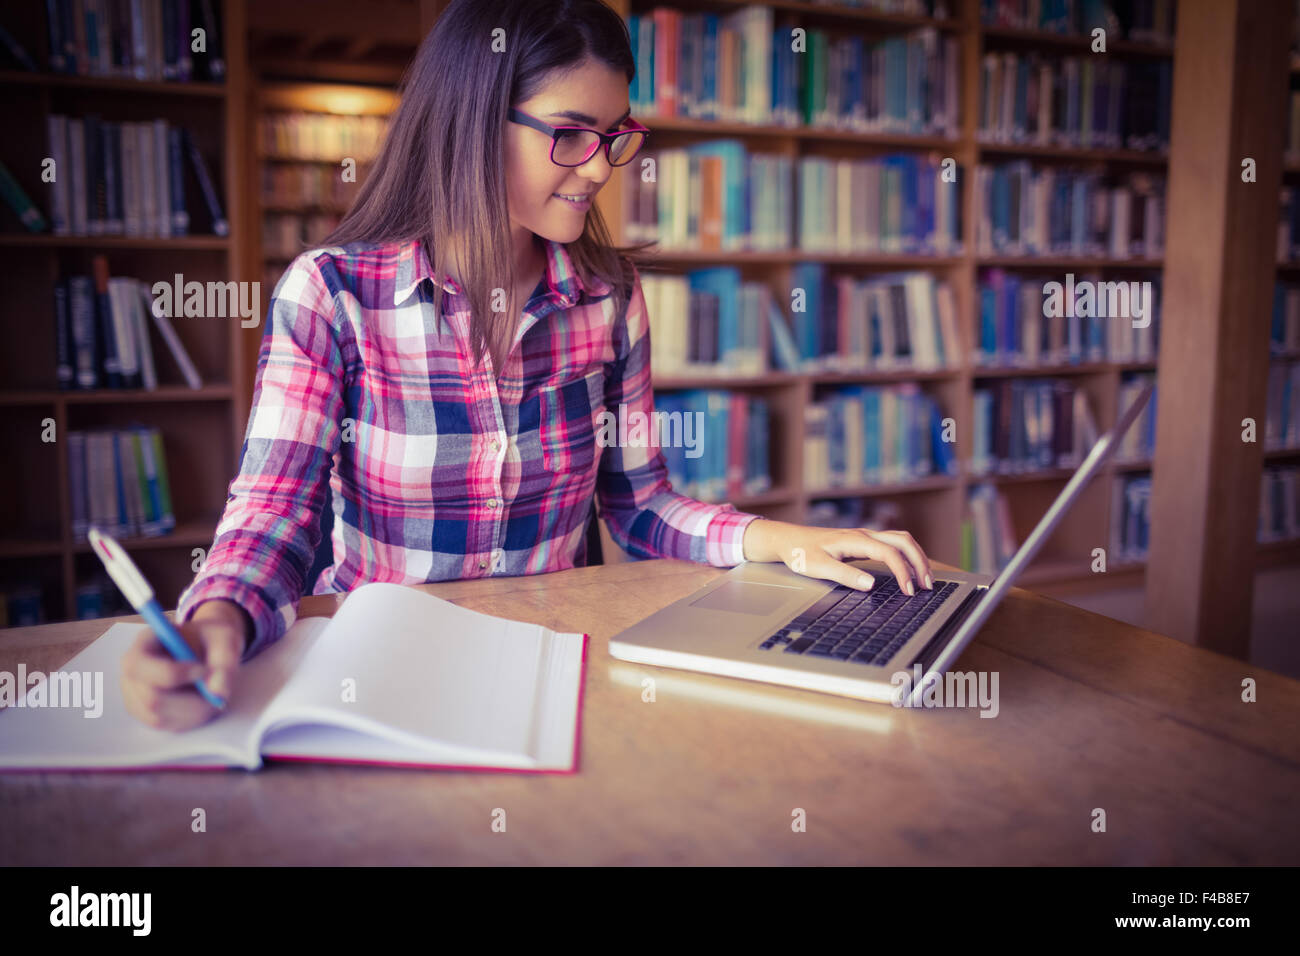 Female student with book using laptop Stock Photo